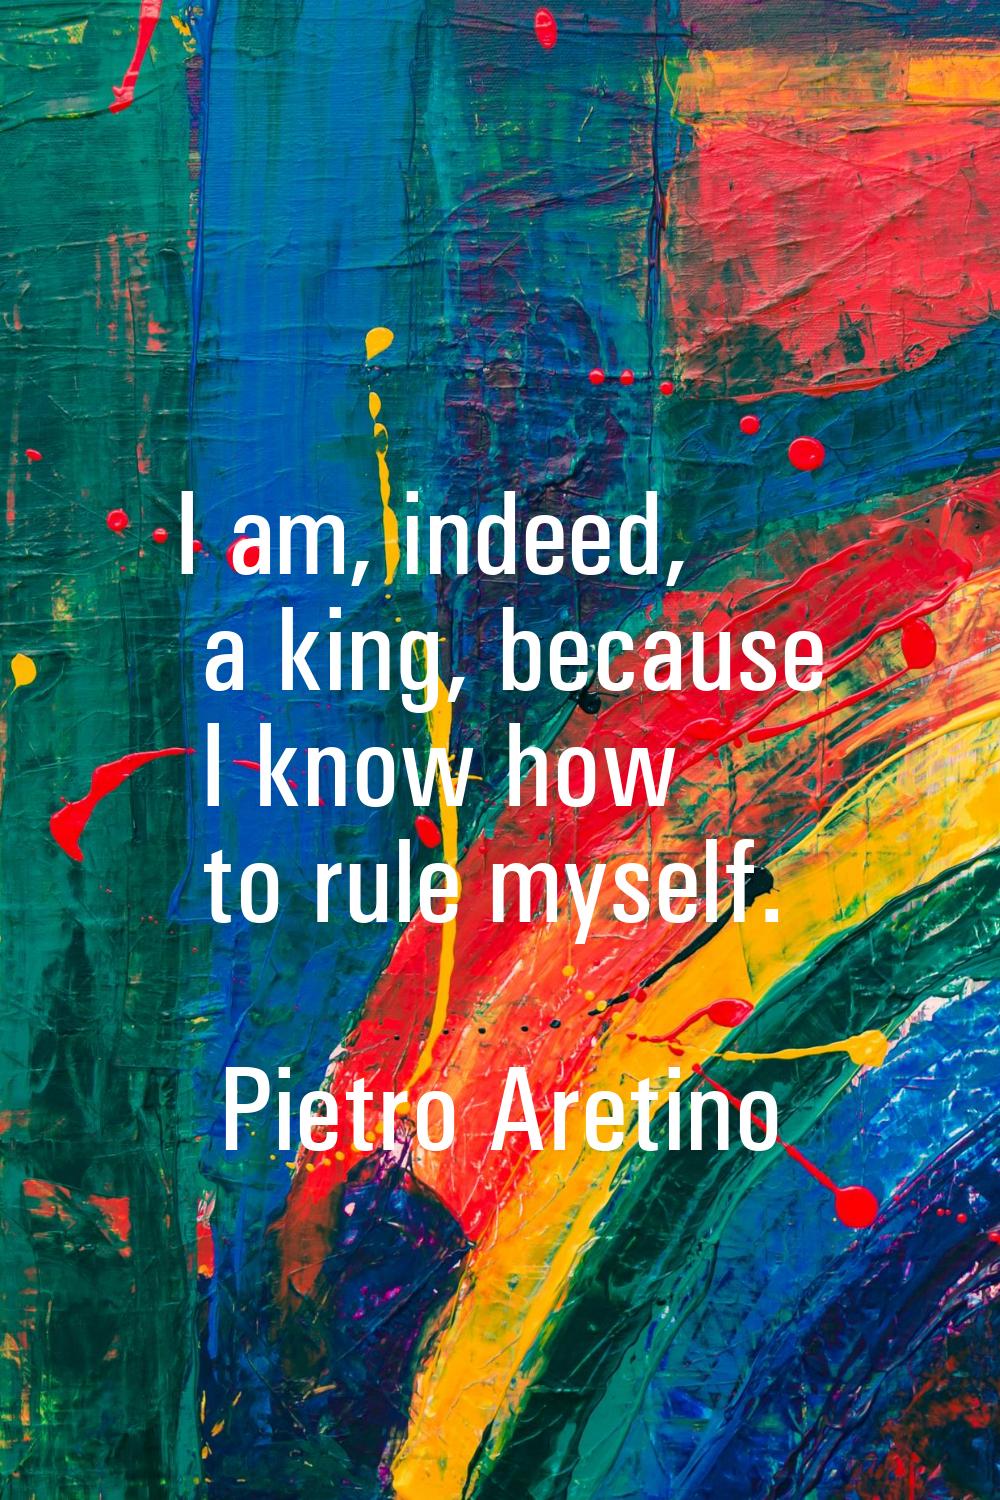 I am, indeed, a king, because I know how to rule myself.